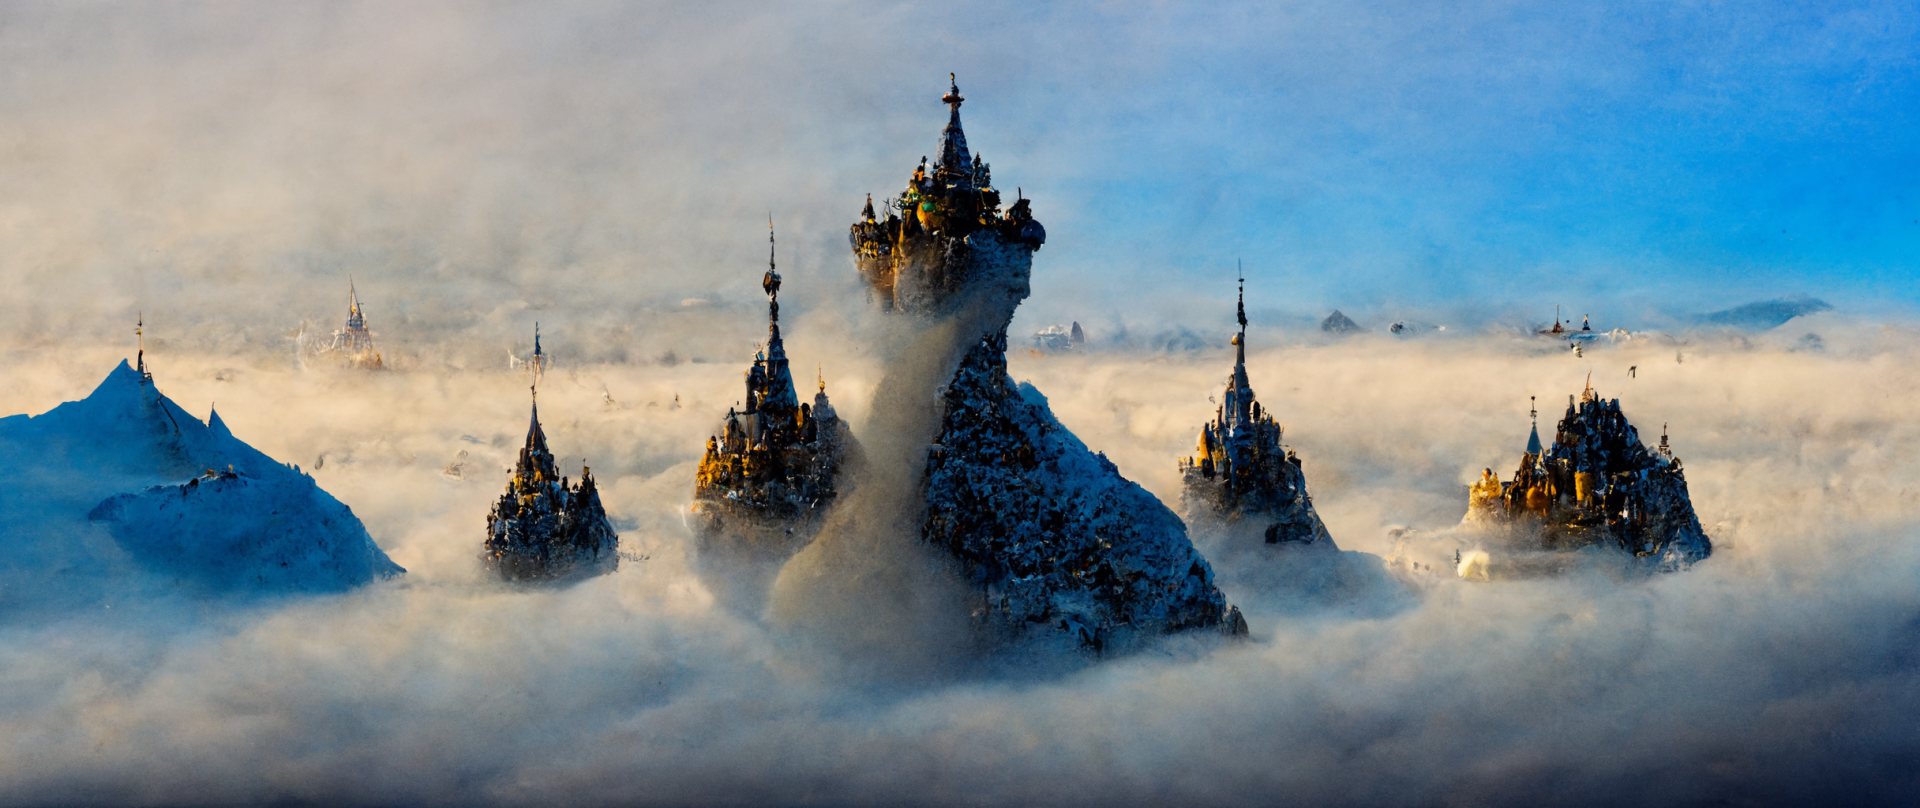 af658101-bffa-44fc-9eed-791ecf0d1ee0_S3RAPH_fantasy_kingdom._castle_towers._background_hills_mist_of_snow_capped_mountains._epic_composition._ma.png